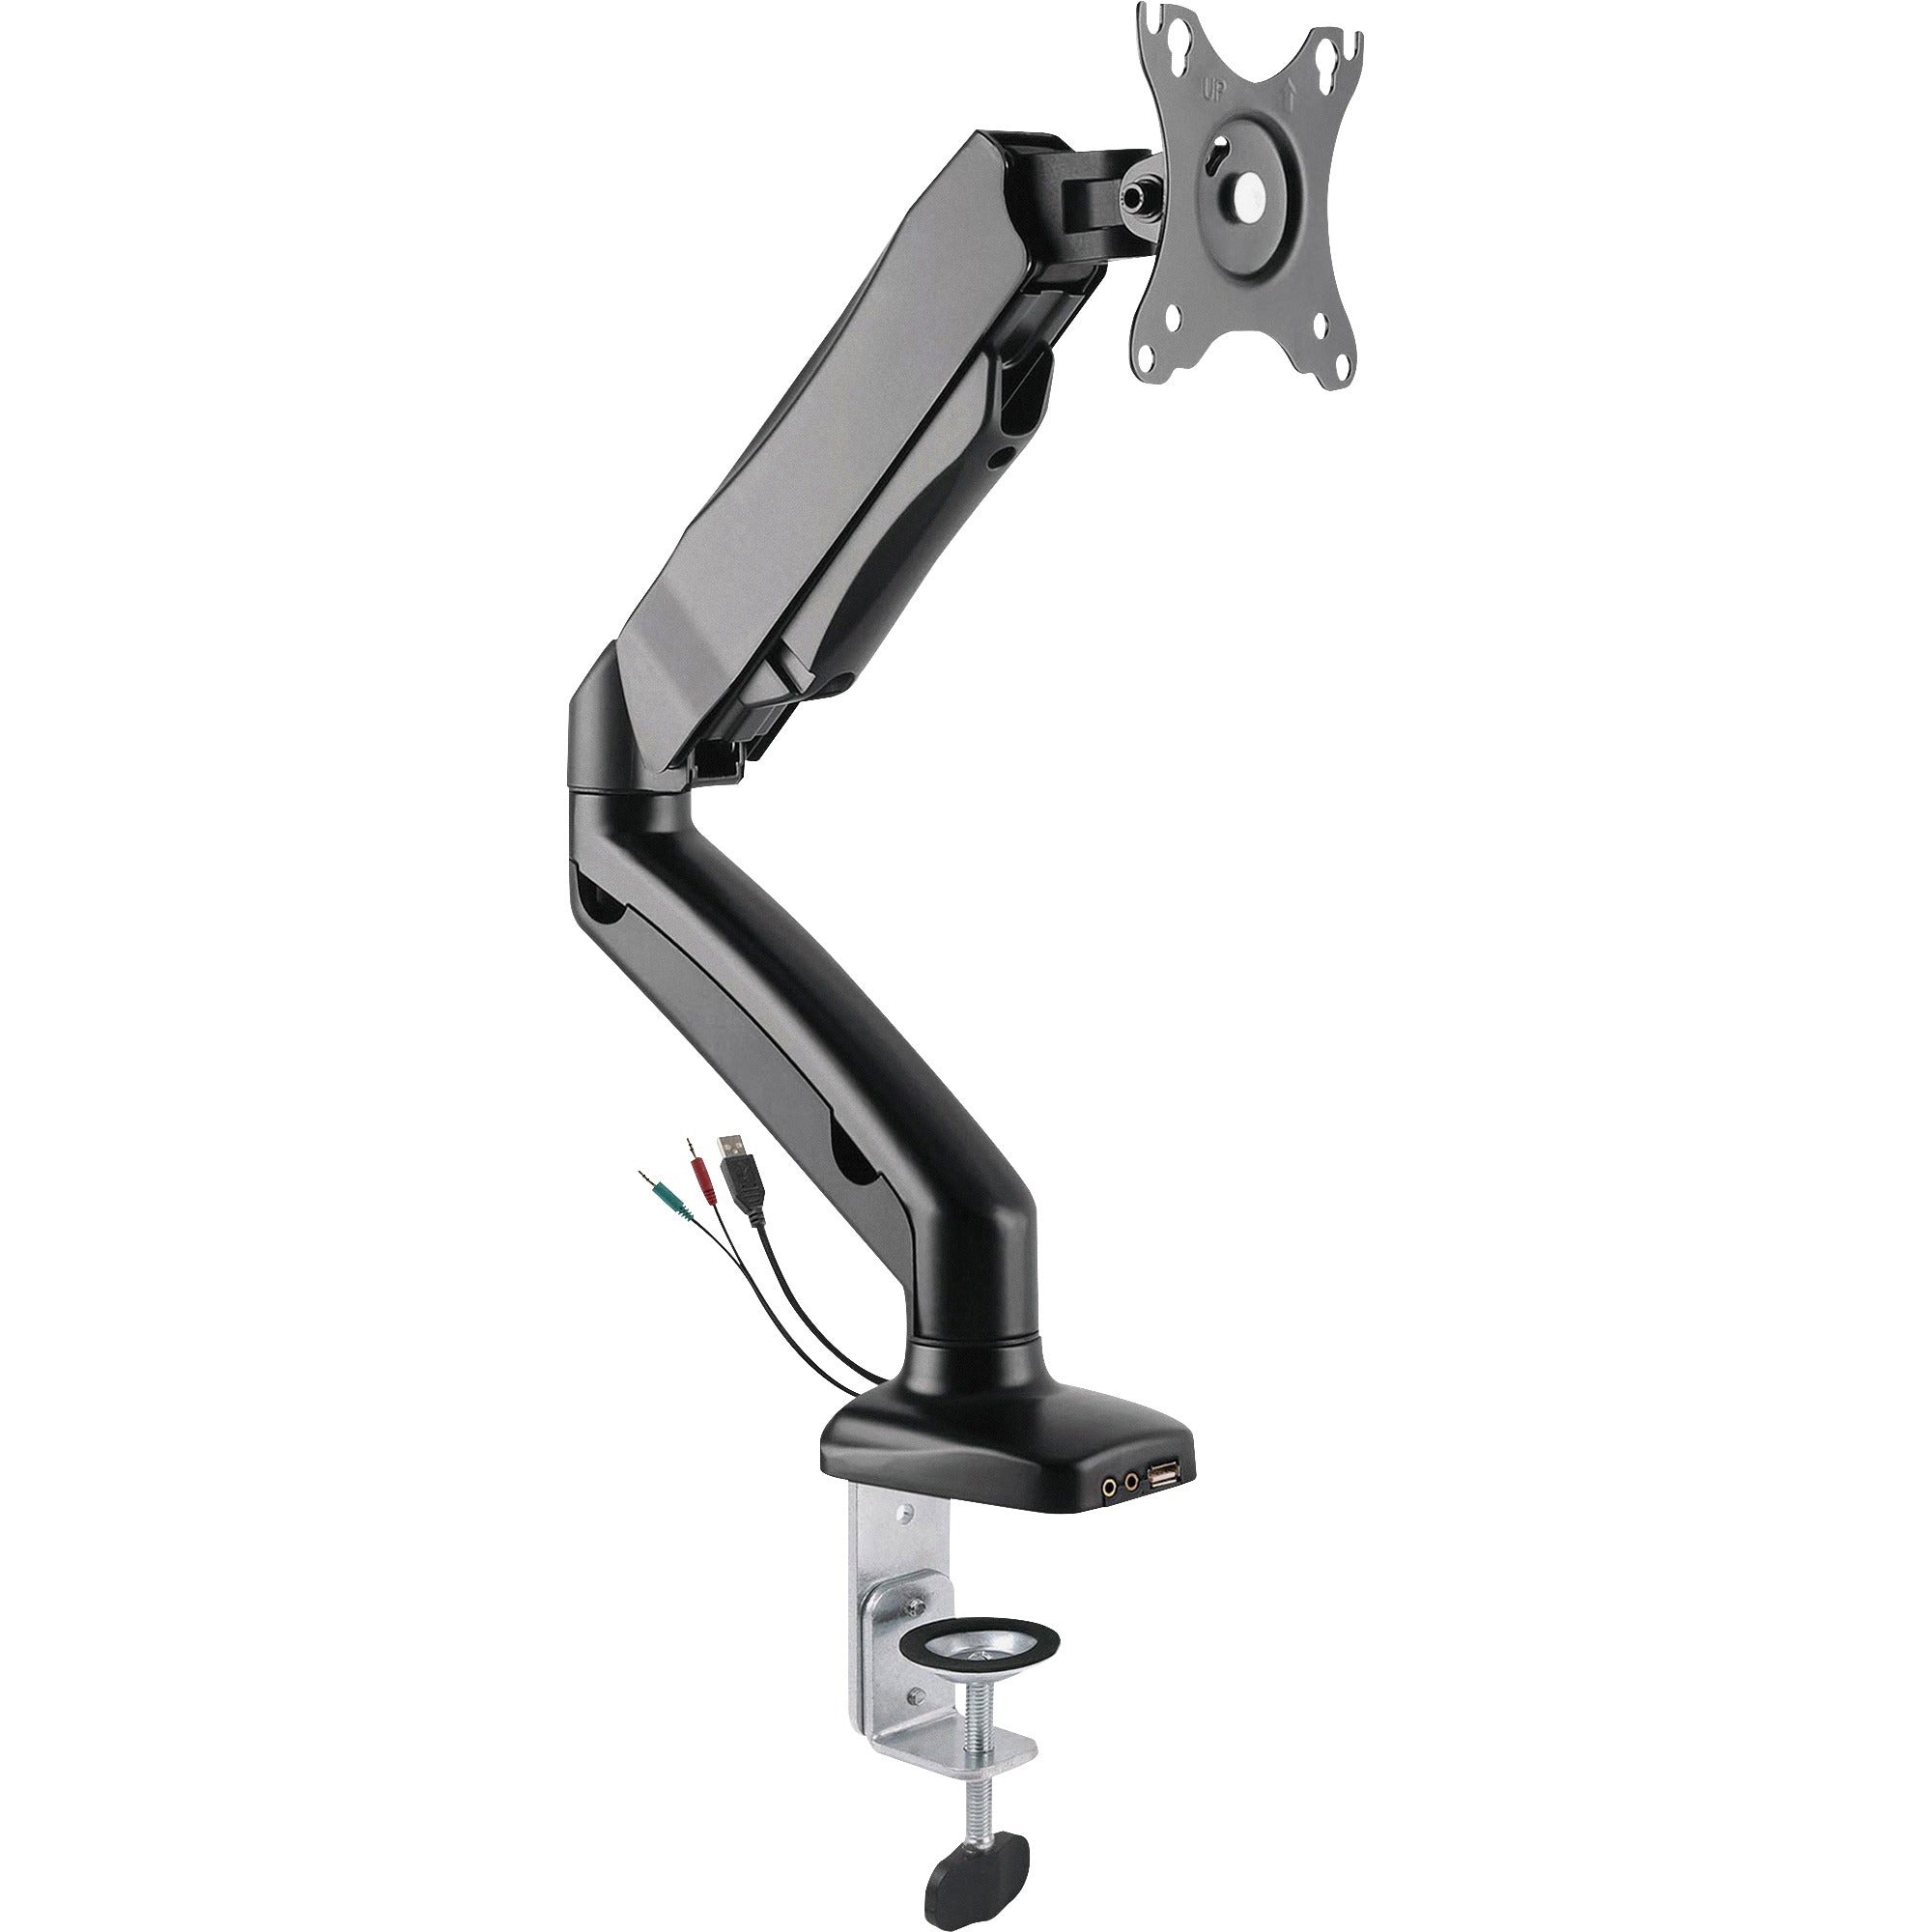 lorell-mounting-arm-for-monitor-black-height-adjustable-1-displays-supported-1430-lb-load-capacity-75-x-75-100-x-100-1-each_llr99800 - 1